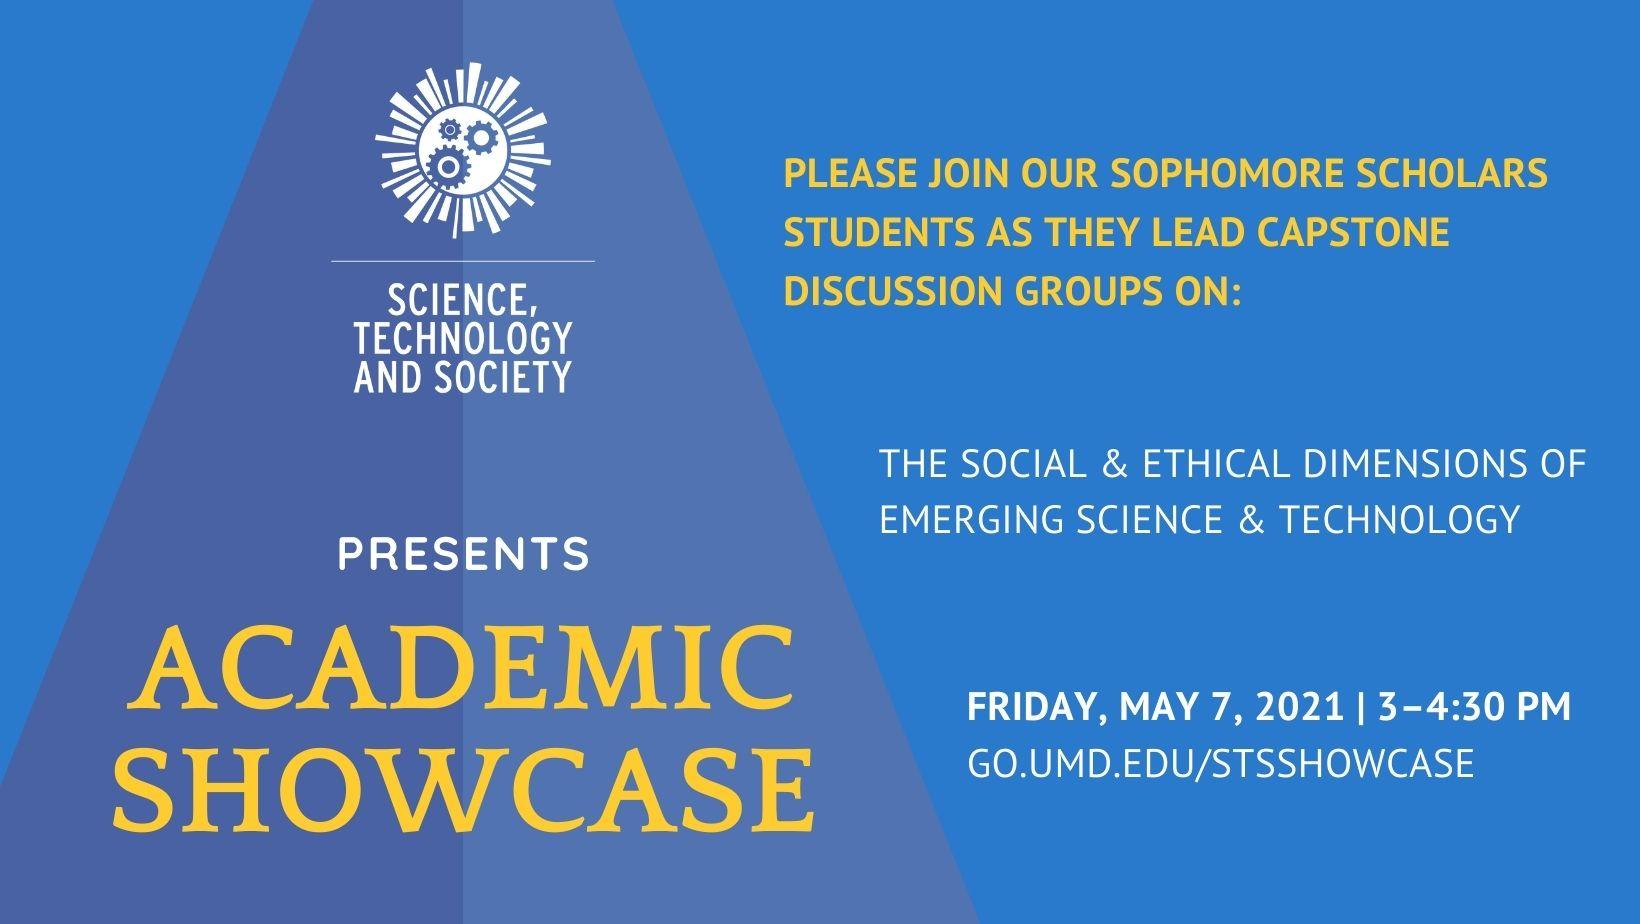 Join STS's Academic Showcase on Friday, May 7, from 3 to 4:30 p.m.